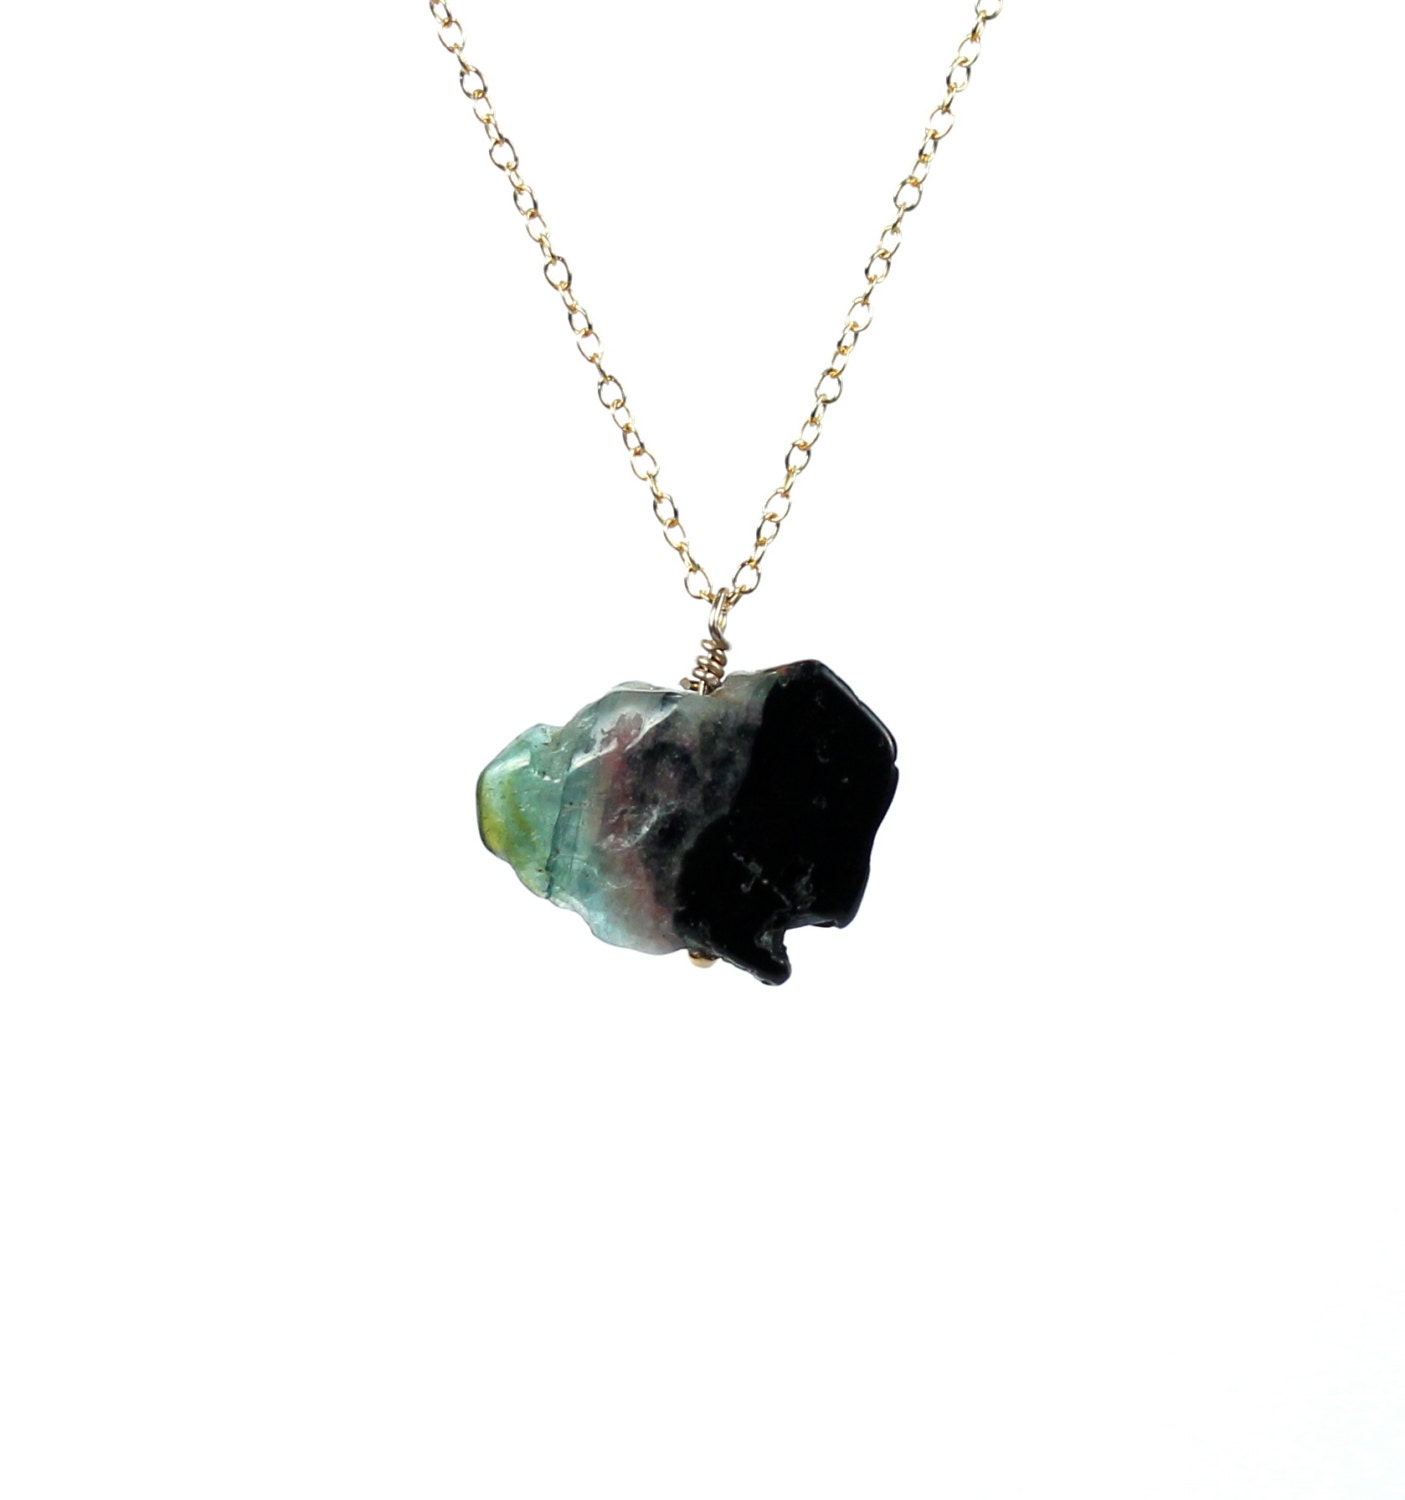 Tourmaline necklace, healing crystal necklace, raw crystal necklace ...